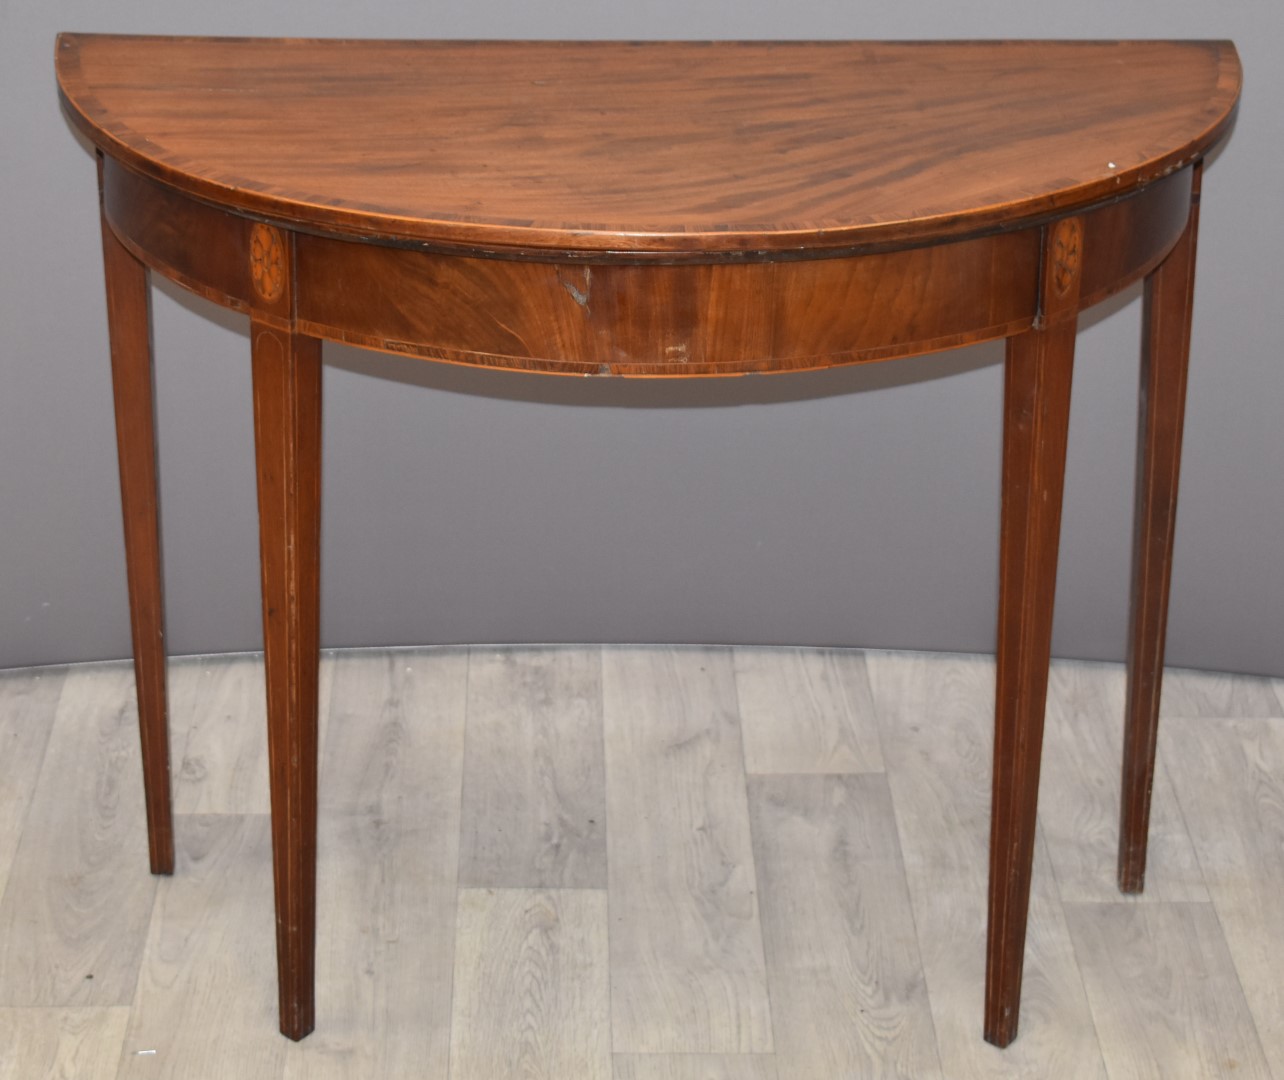 19thC mahogany fold over card table with crossbanded decoration, W90 x D45 x H70cm - Image 3 of 3